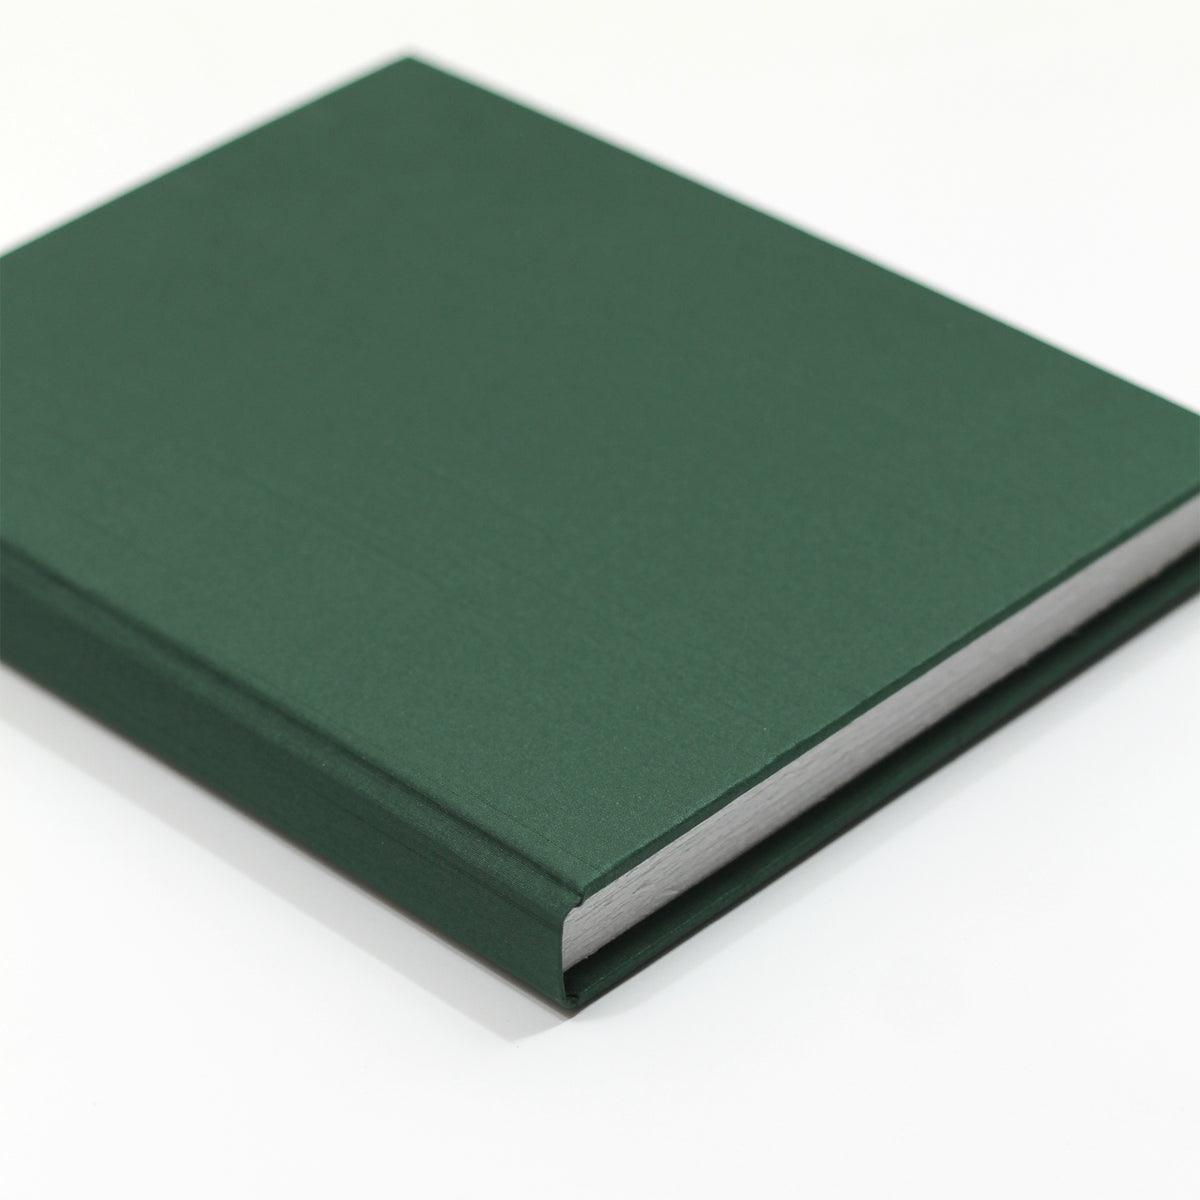 Large 8x10 Blank Page Journal | Cover: Emerald Silk | Available Personalized